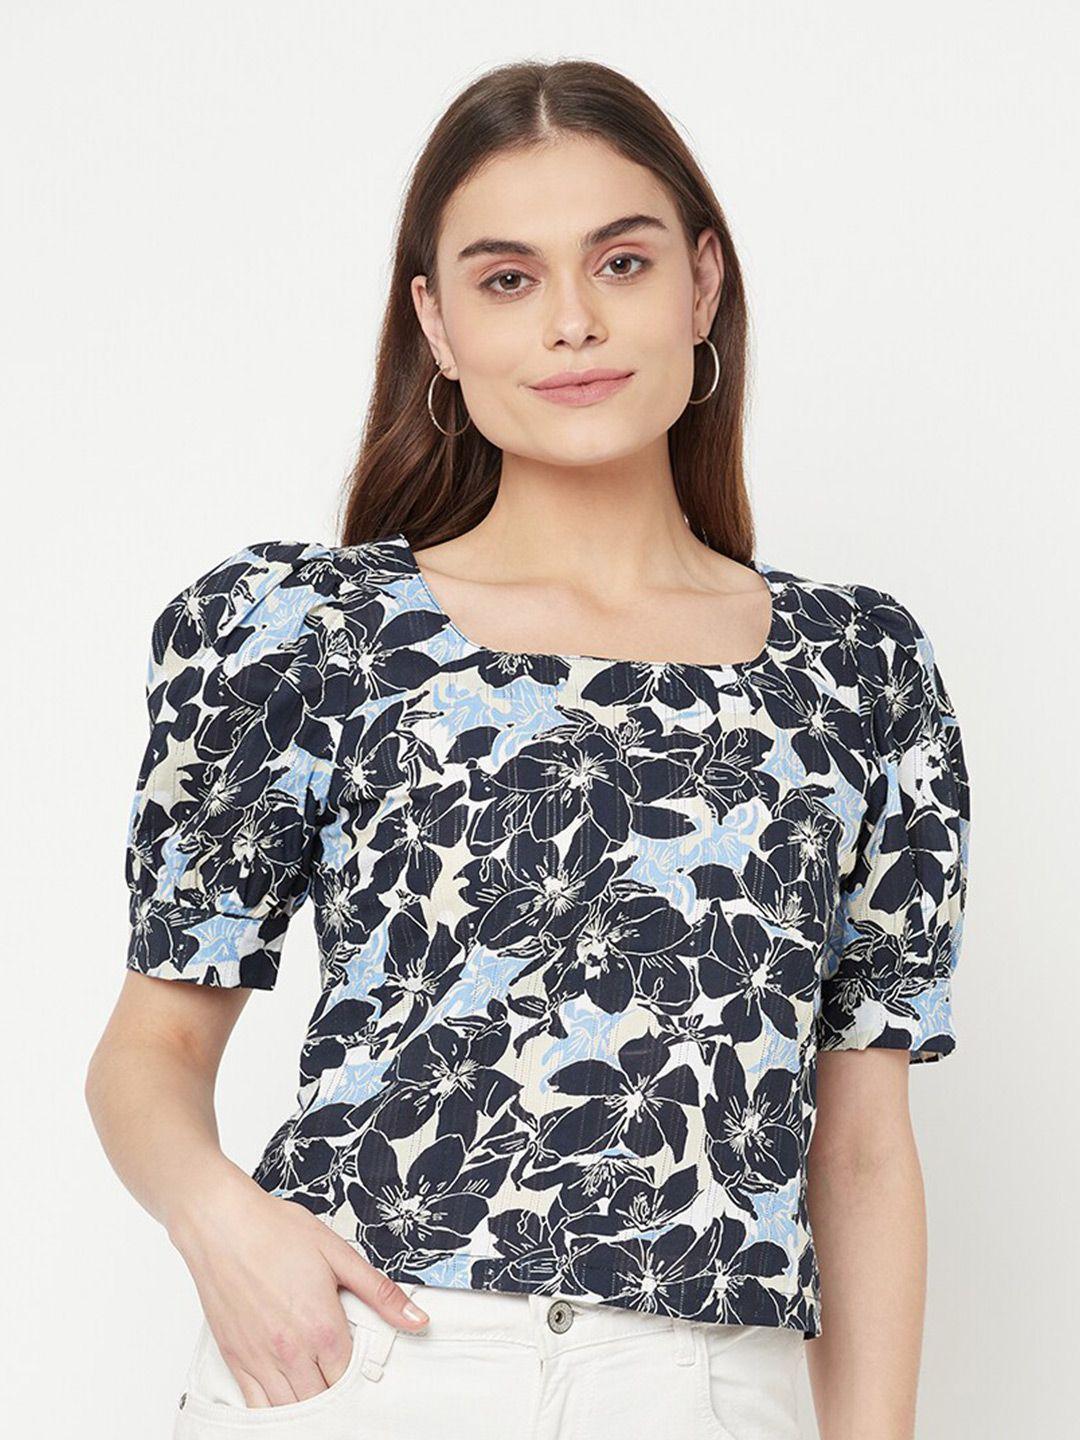 raassio floral print pure cotton crop top